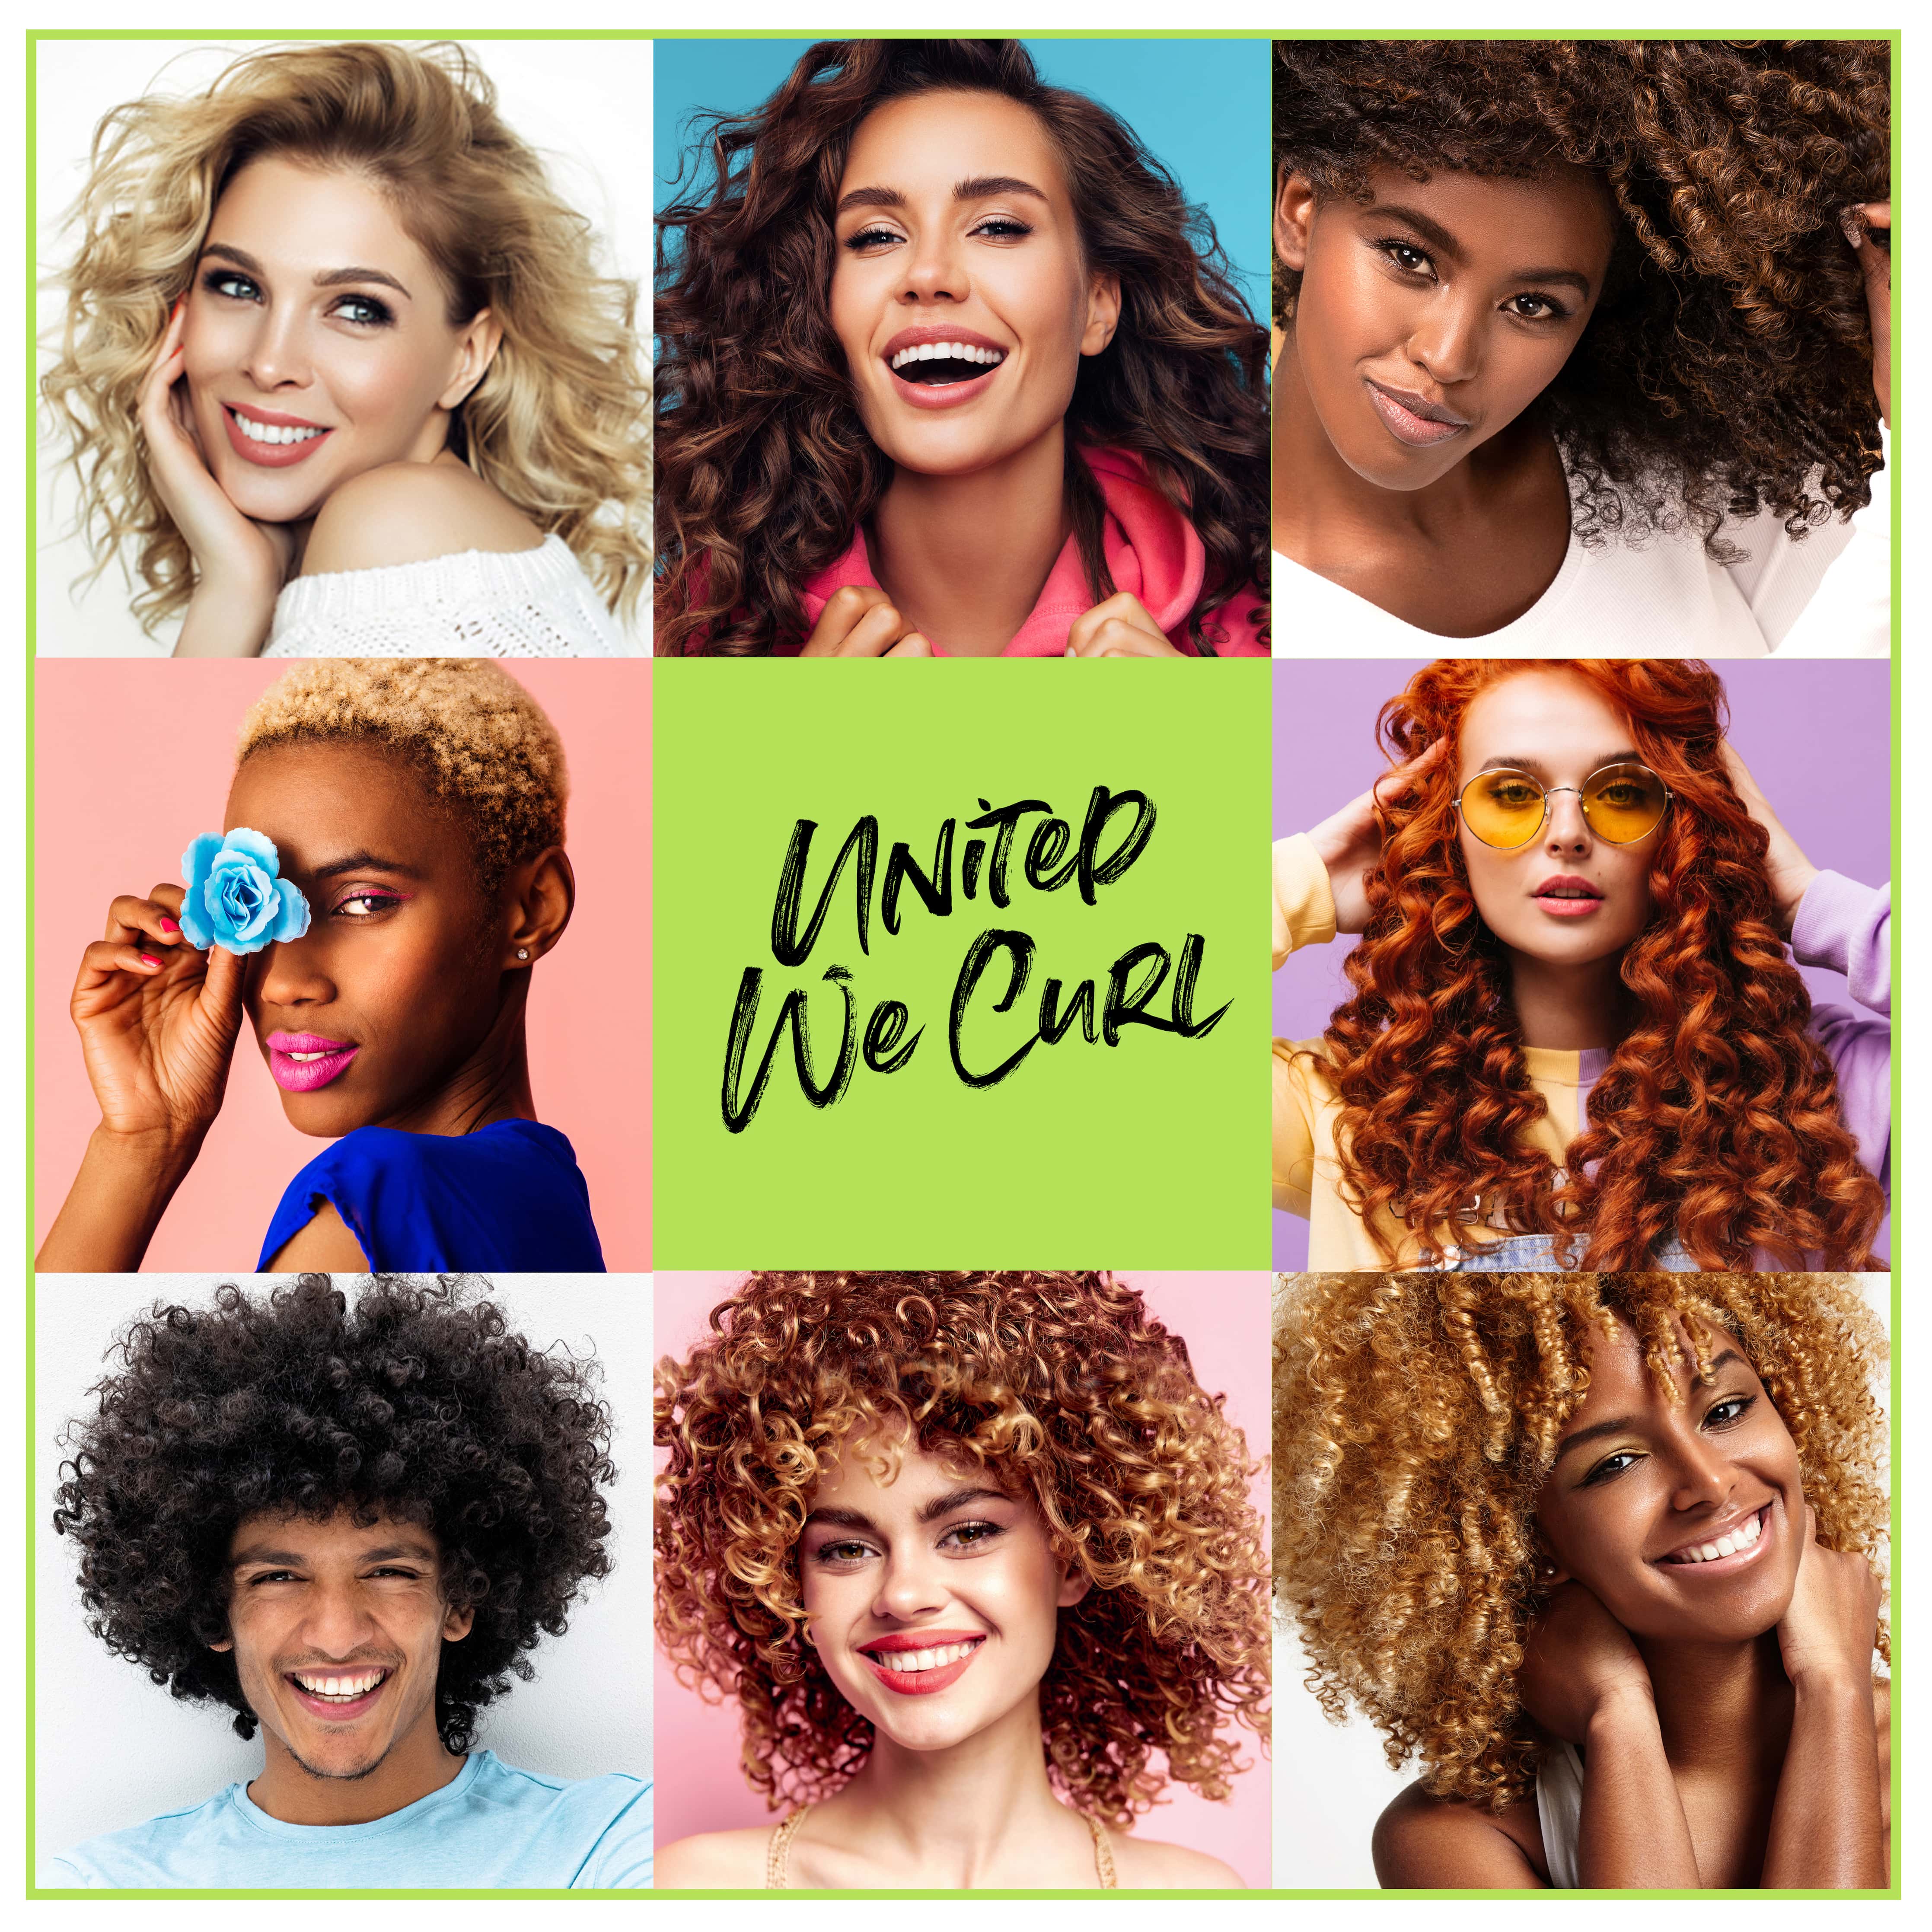 Eight curly haired models posing around the text "United We Curl".